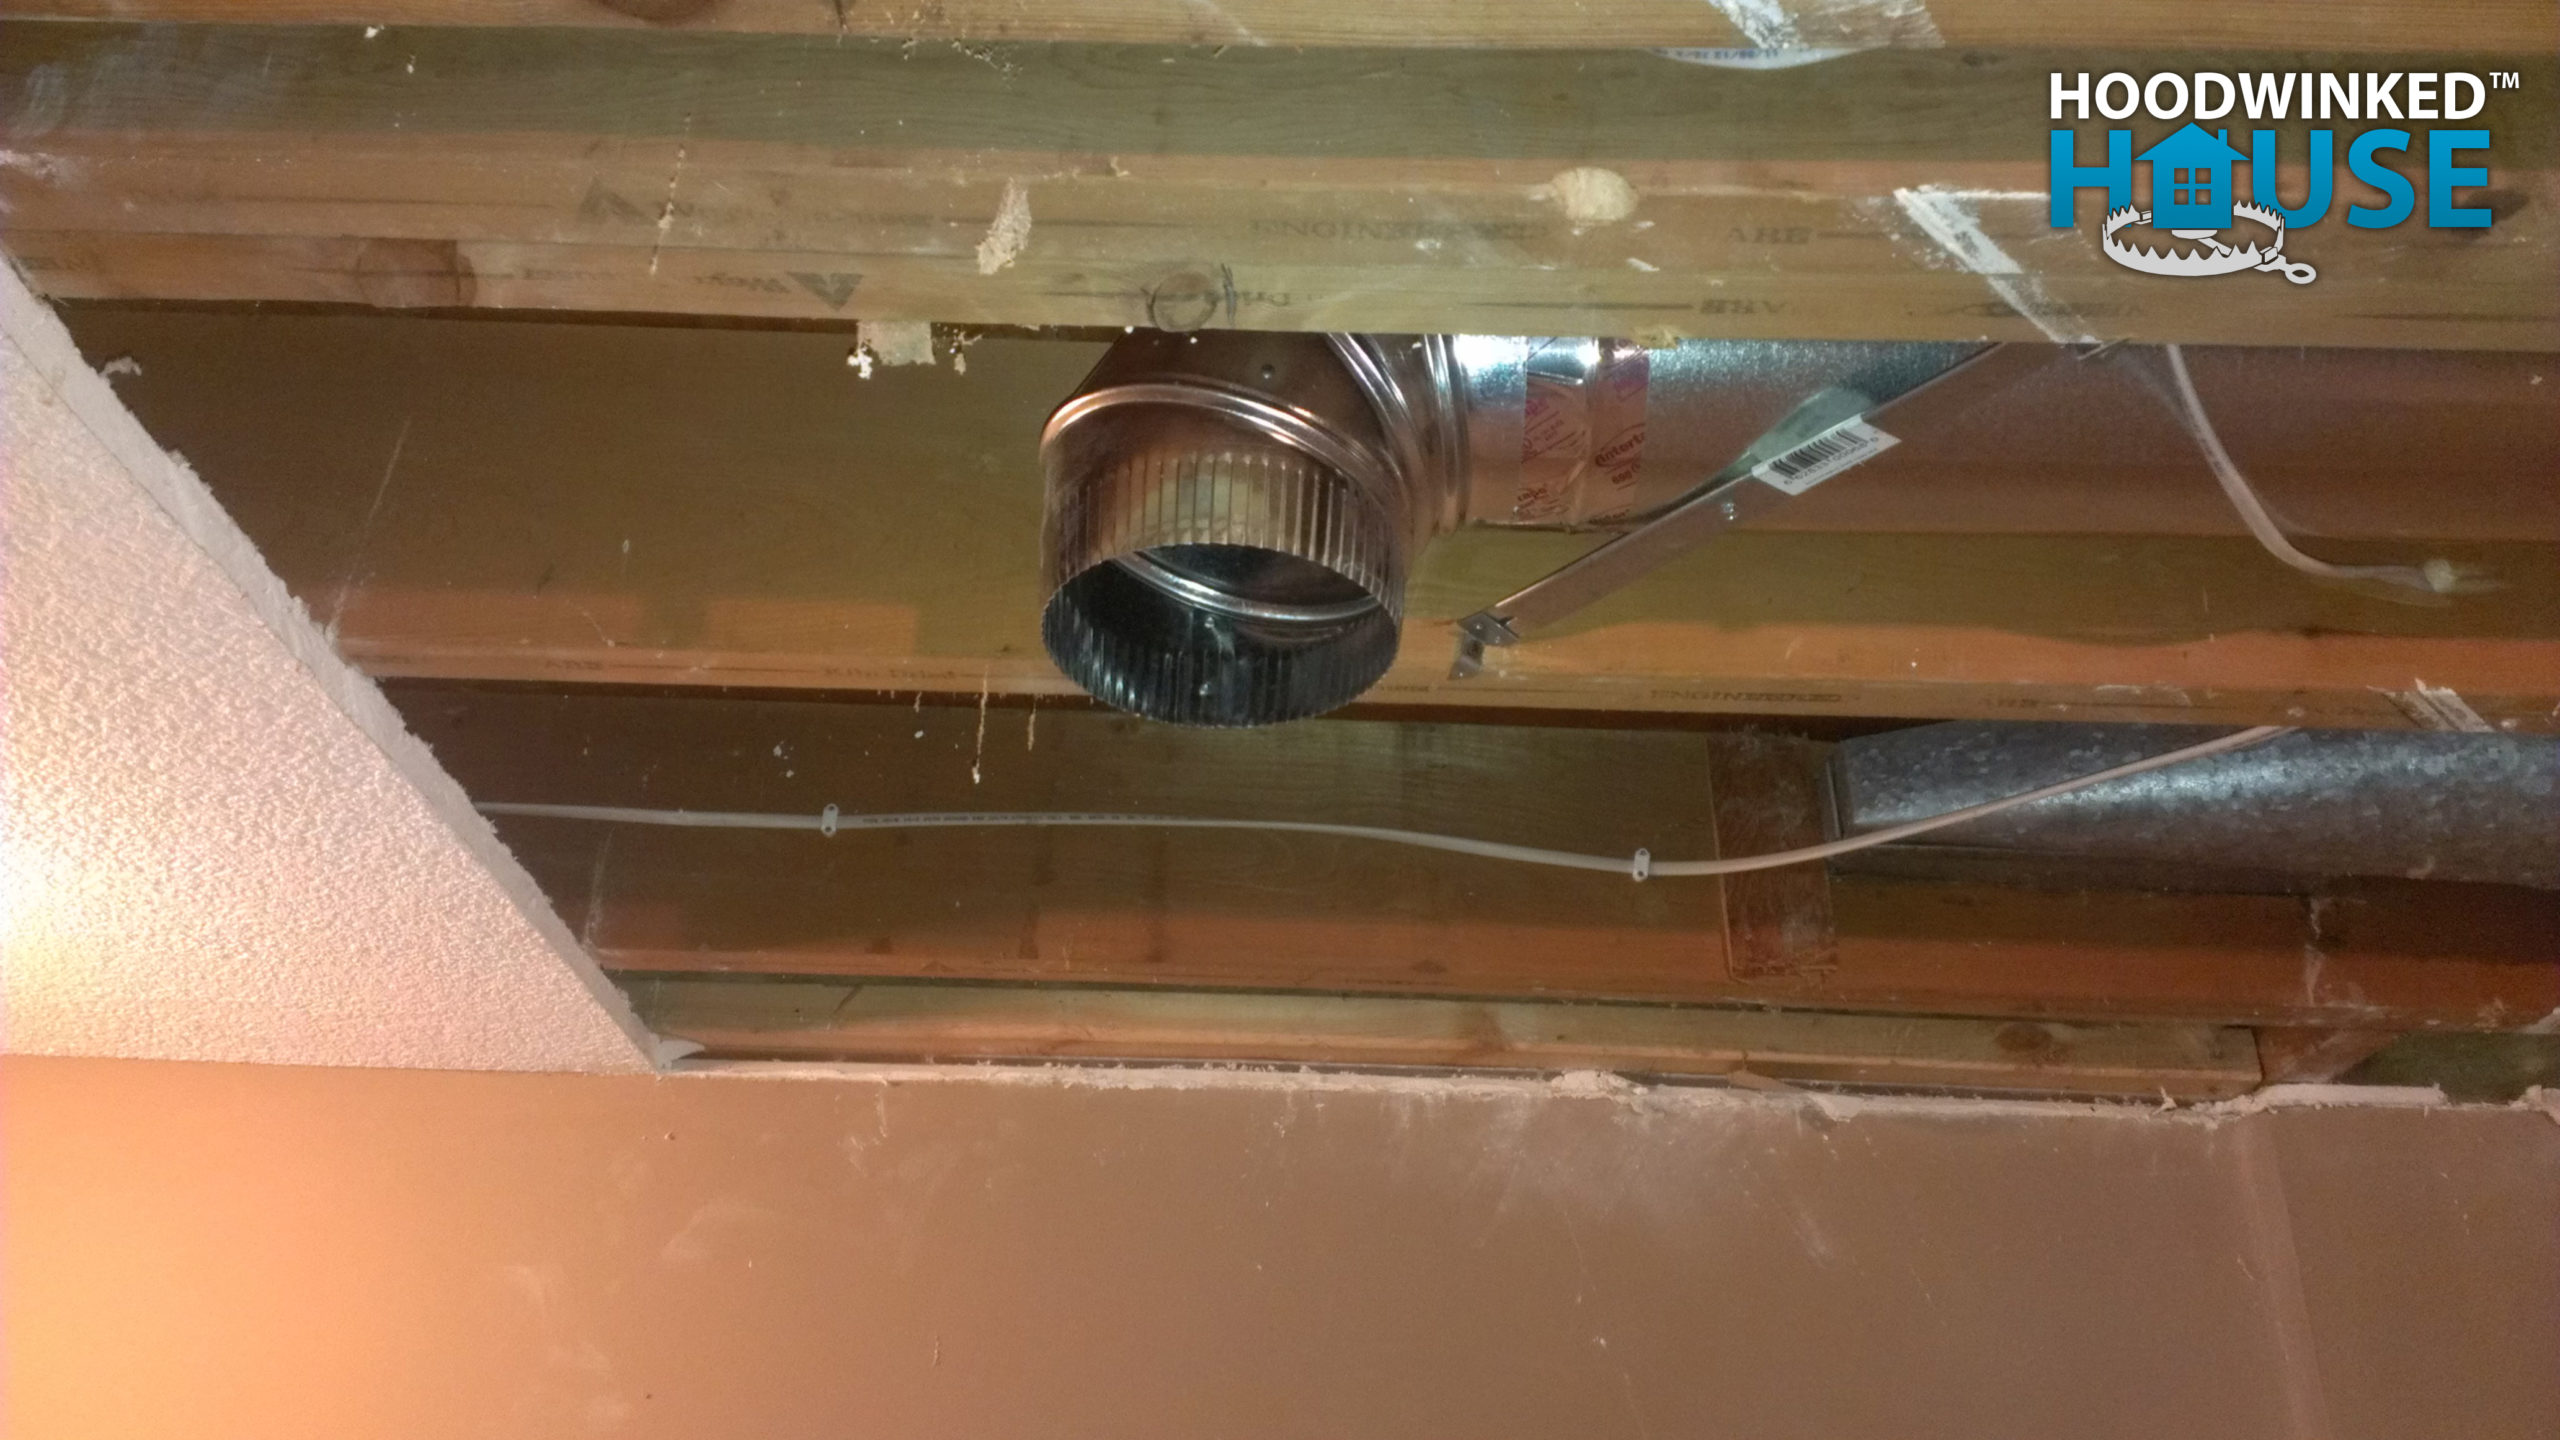 An basement ceiling air duct branch ends in an elbow.